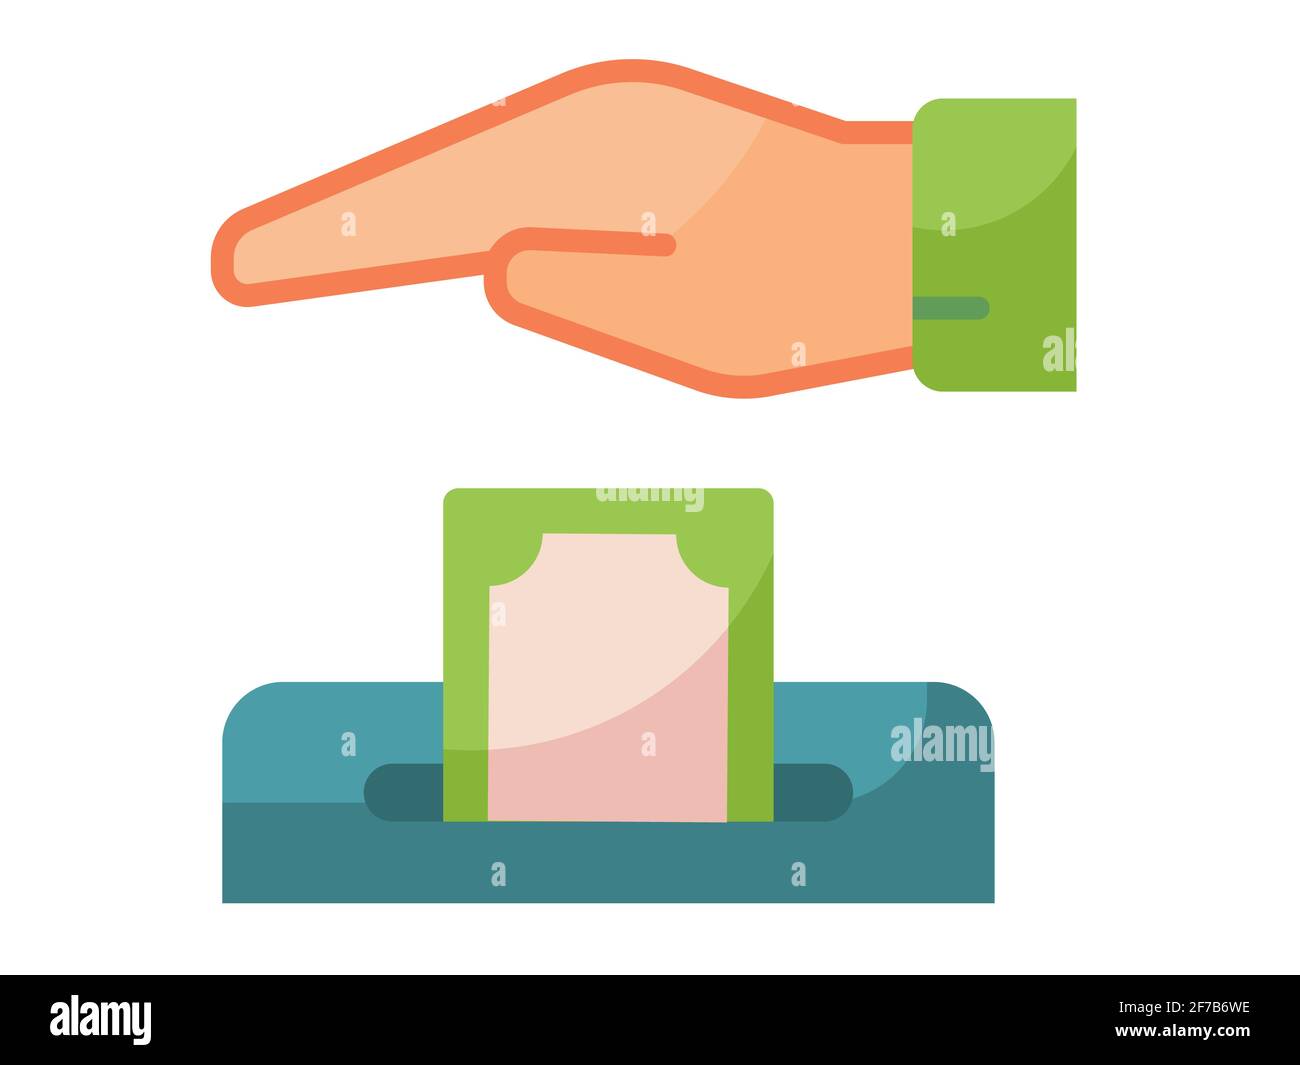 charity give giving ramadan single isolated icon with flat style vector illustration Stock Photo